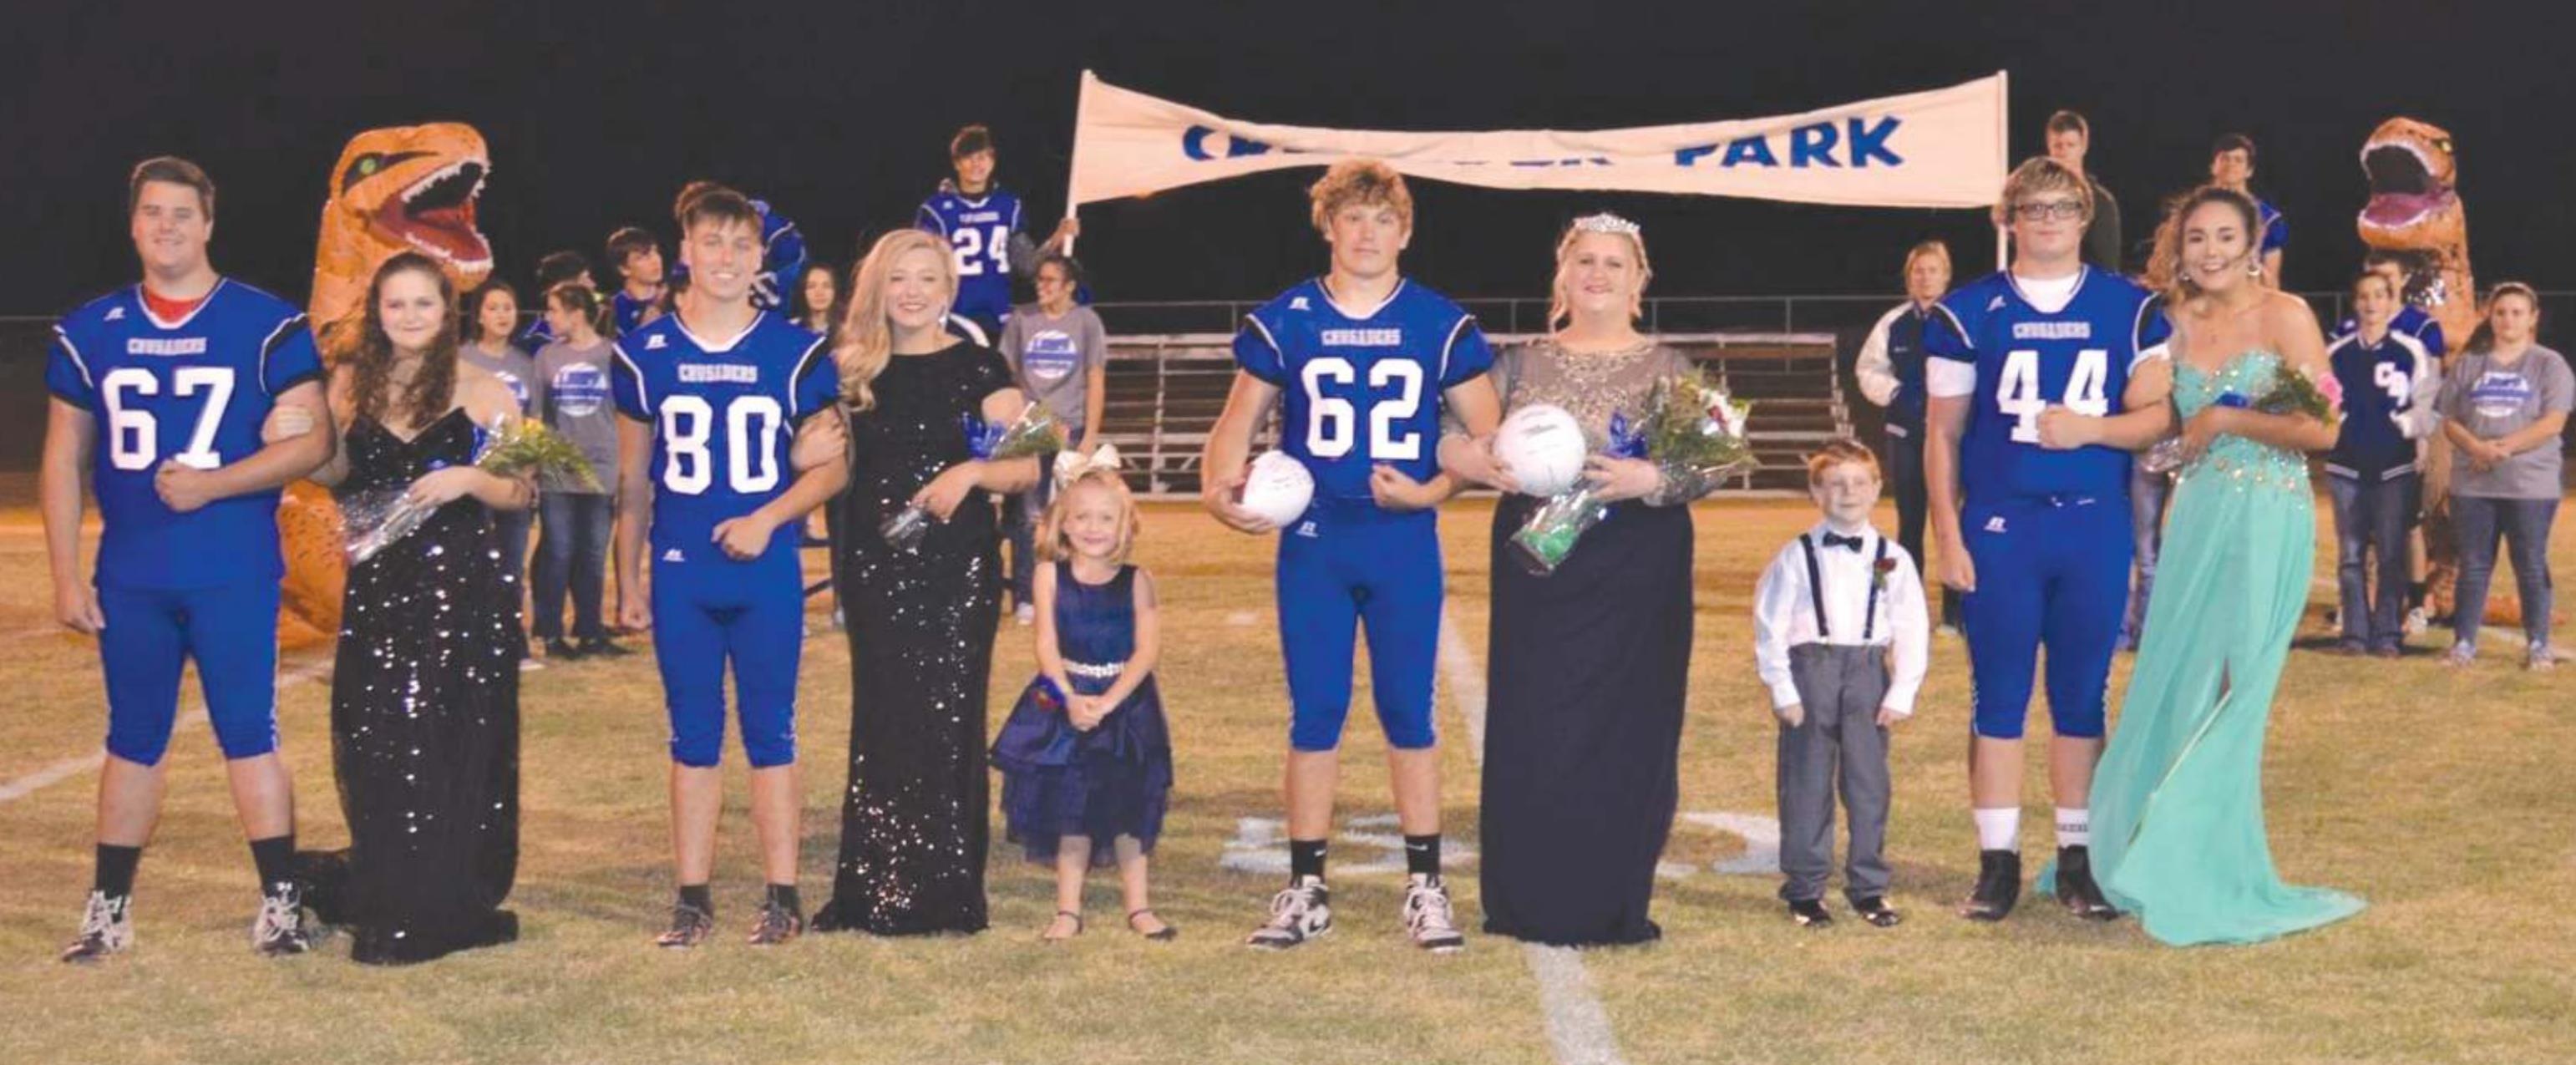 Pictured are Corn Bible Academy’s 2020 Fall Homecoming candidates. From left is Blake Brewer of Clinton, Kaysa Carpenter of Corn, River Lewis of Weatherford, Audra and Scarlett Fowble of Thomas, King Andrew Koscheski of Clinton, Queen Kennedy Listak of Clinton, Liam Schmidt of Corn, Cooper Brittain of Elk City and McKinsi Grube of Foss. Provided